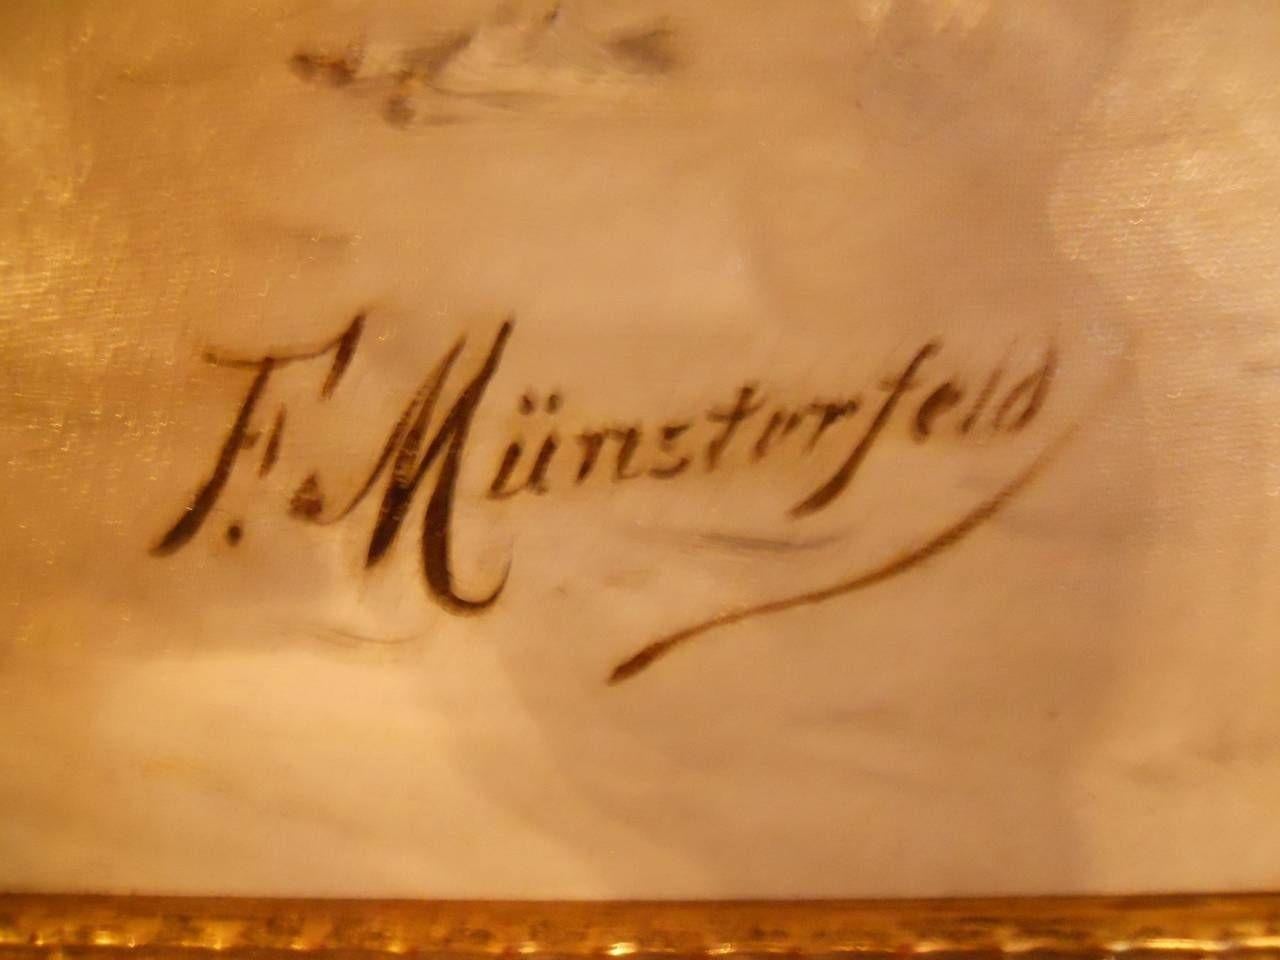 Other Exceptional F. Munsterfeld Painting For Sale